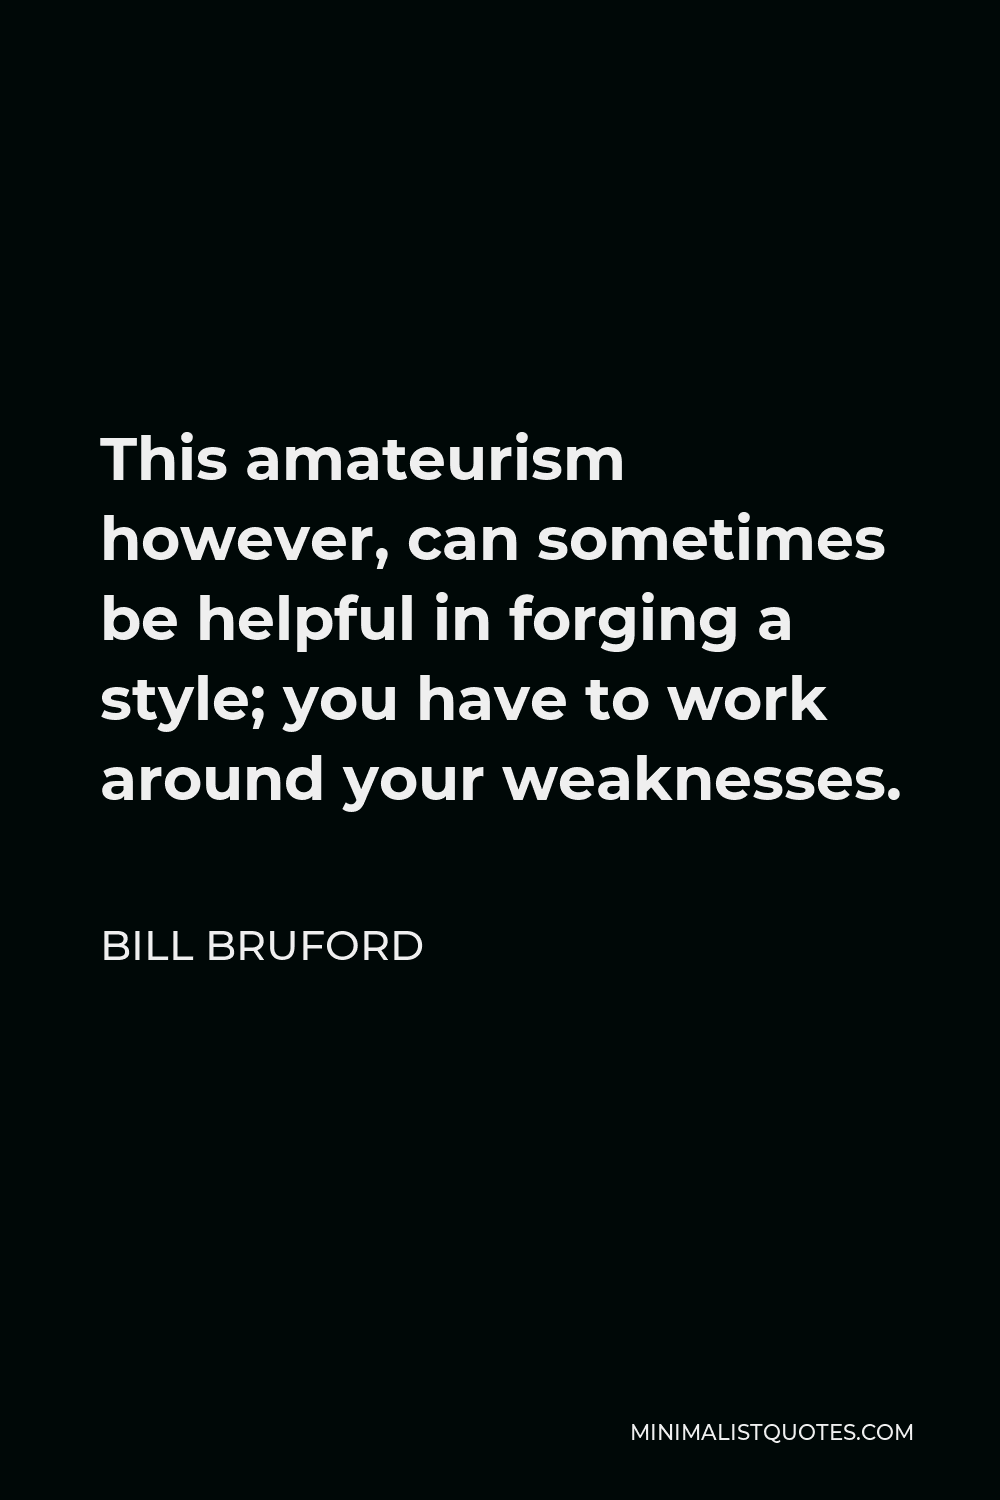 Bill Bruford Quote - This amateurism however, can sometimes be helpful in forging a style; you have to work around your weaknesses.